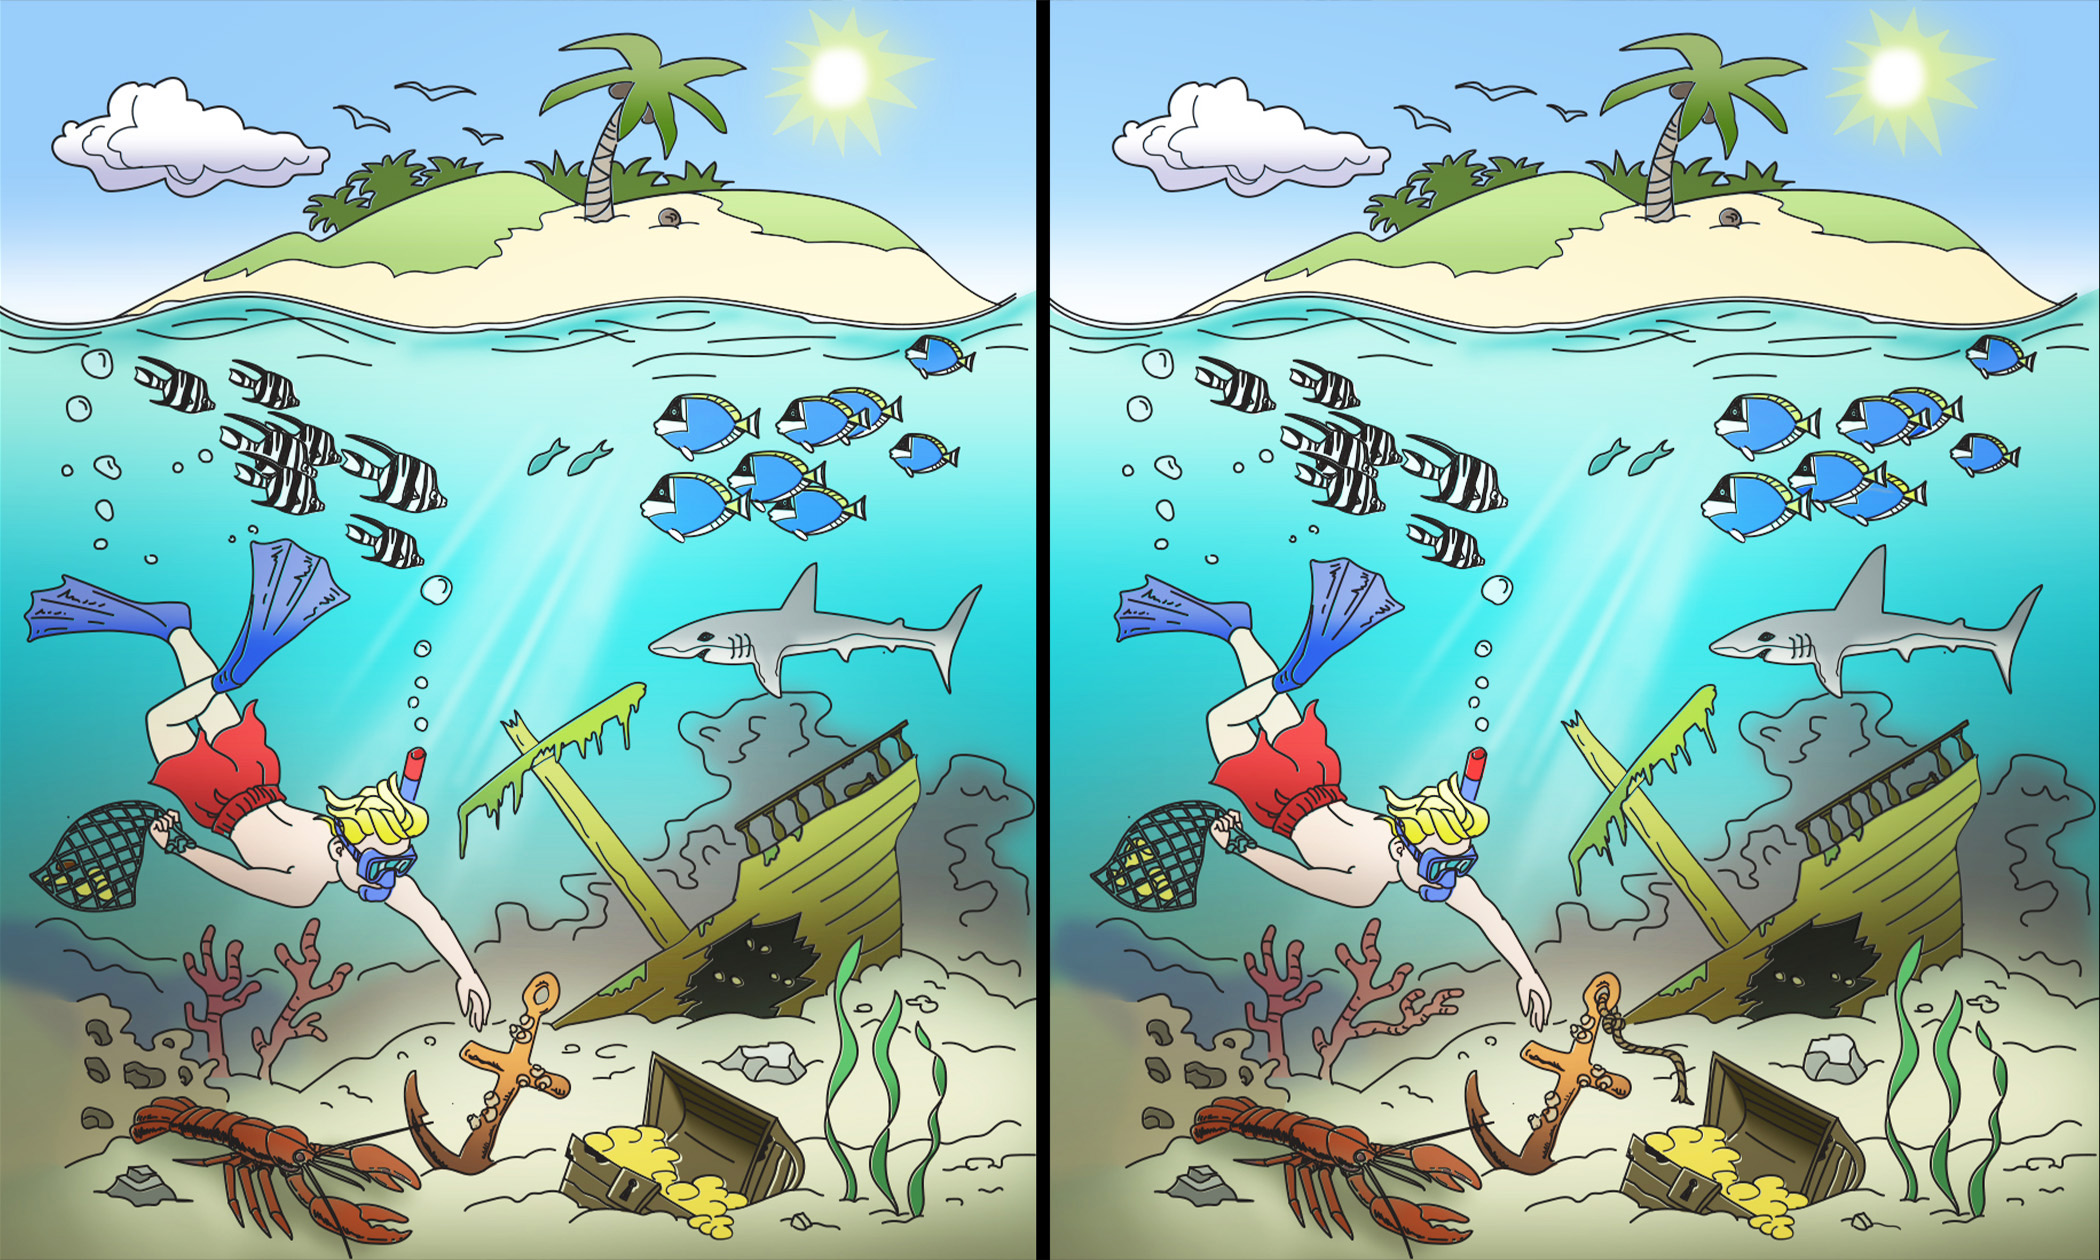 Can You Spot 11 Differences Hidden in These 2 Balmy Underwater Scenes ...